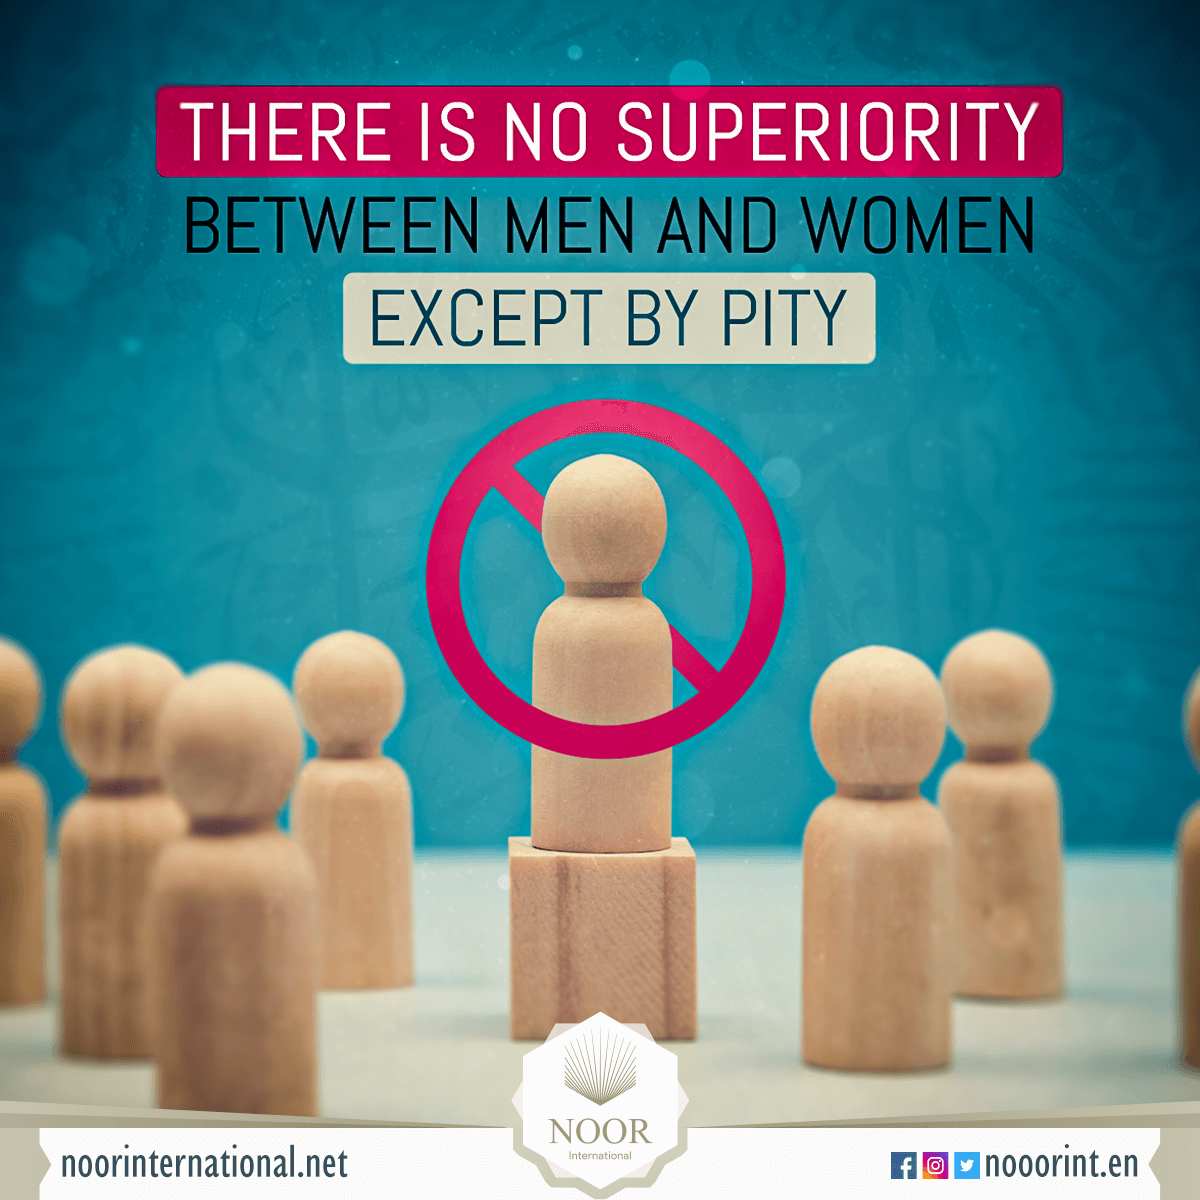 There is no superiority between men and women except by pity